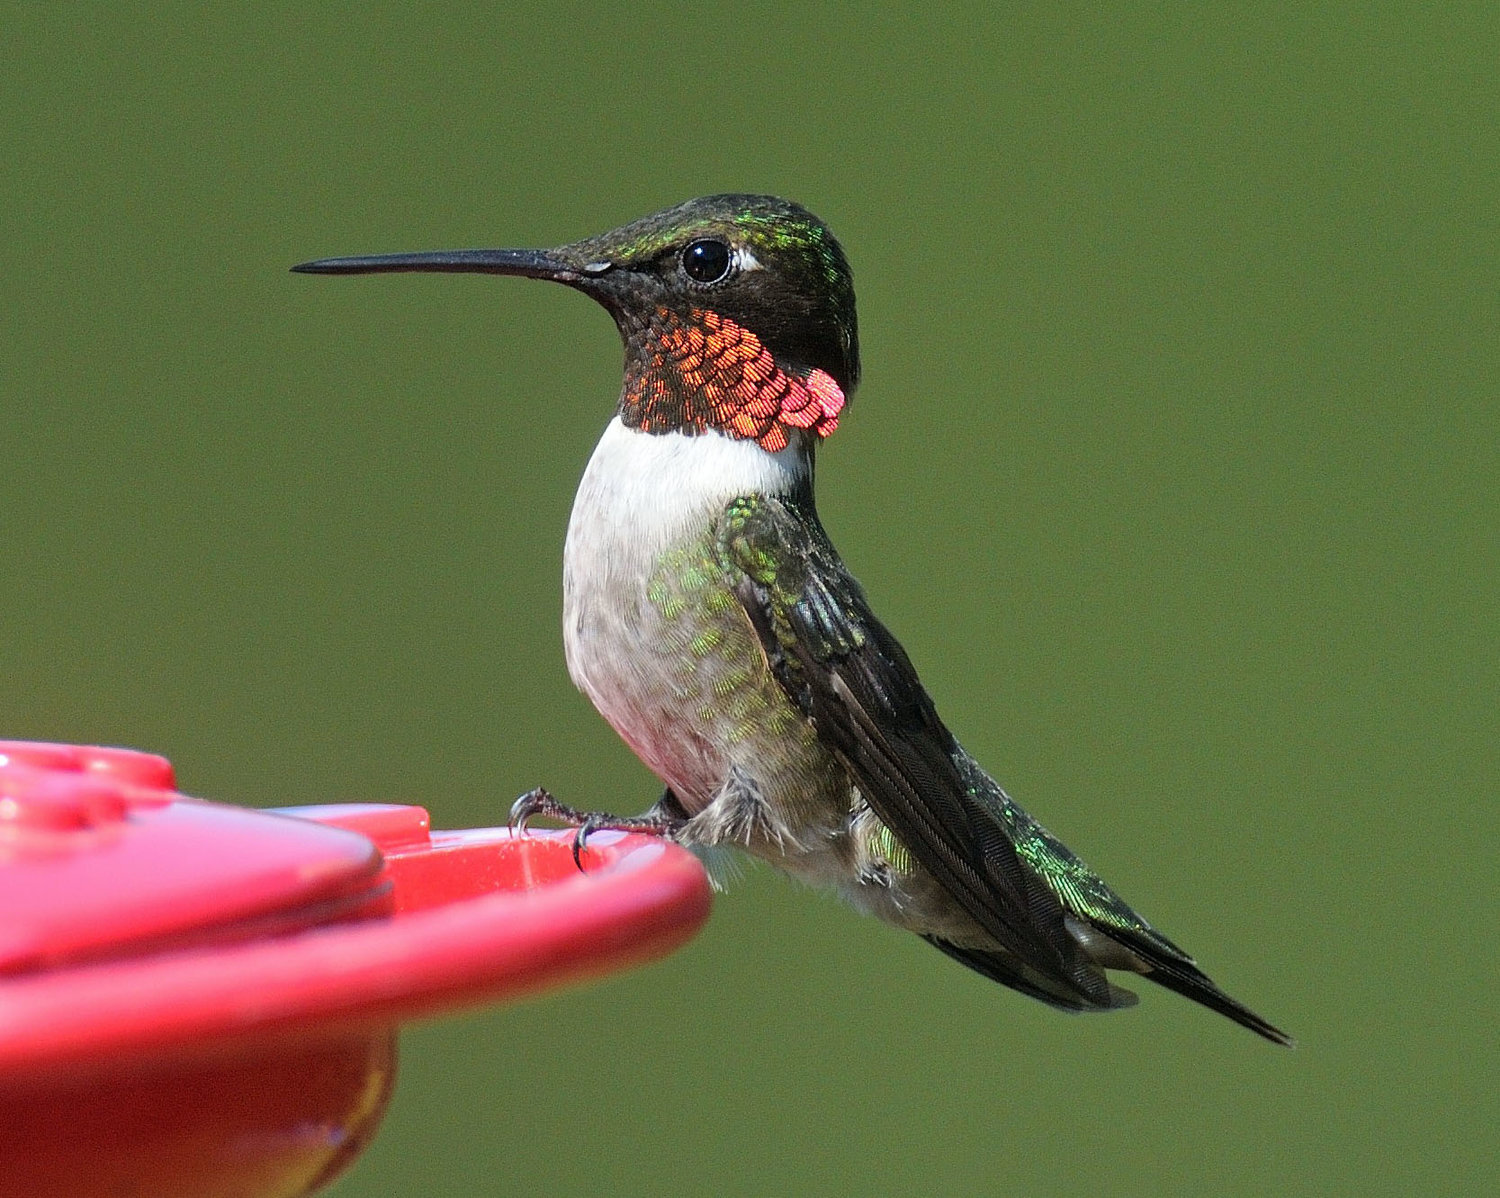 A male ruby-throated hummingbird is partaking of some sugar water at this feeder. The sugar water should be replaced every other day if the hummingbirds haven’t depleted it first. A mix of 1 part sugar to 4 parts of water is recommended. Use refined (white) sugar only. Extra sugar water mix can be kept in the refrigerator for up to two weeks.